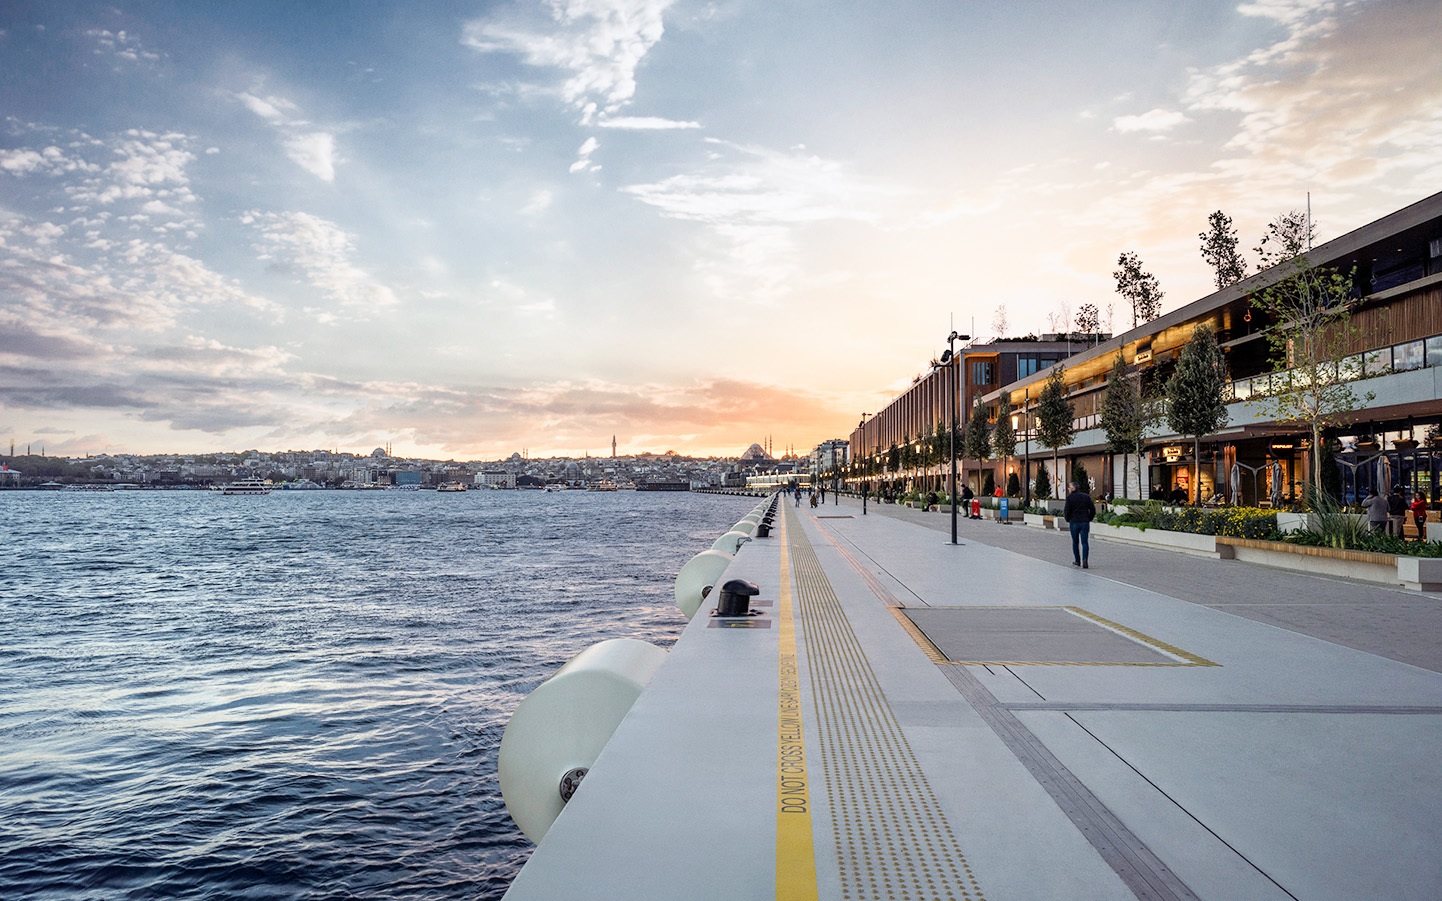 Istanbul Is Where The World’s Attention Is Focused: Purchasing Investment Real Estate